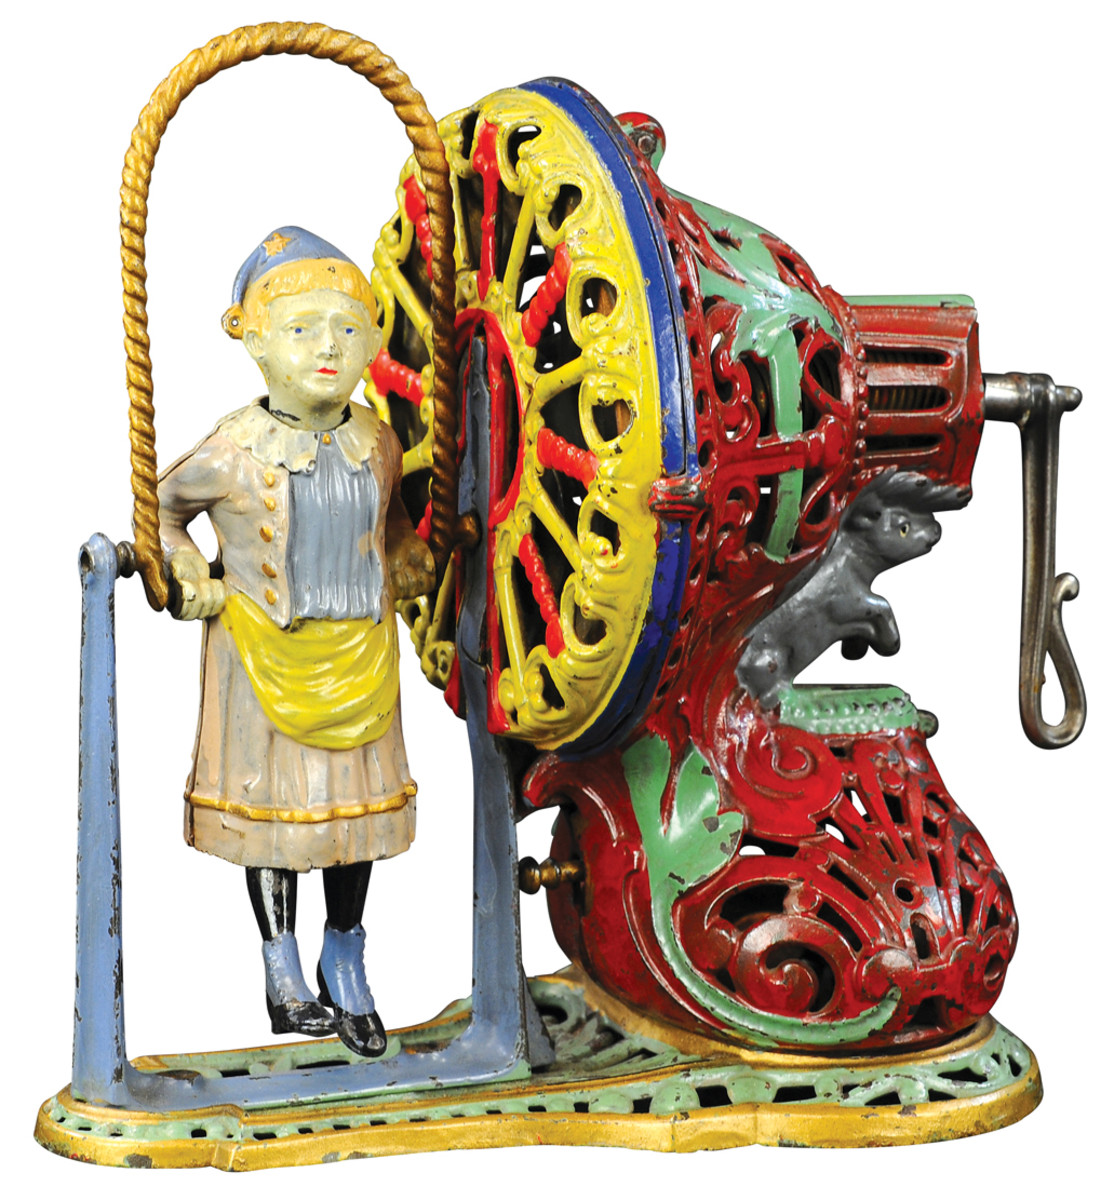 This Girl Skipping Rope mechanical bank was the top lot of the two-day sale, bringing $156,000. By J & E Stevens, this interesting bank is arguably the most coveted example for mechanical bank collectors. The clever design causes the girl to alternate feet and turn her head as she skips the rotating rope.